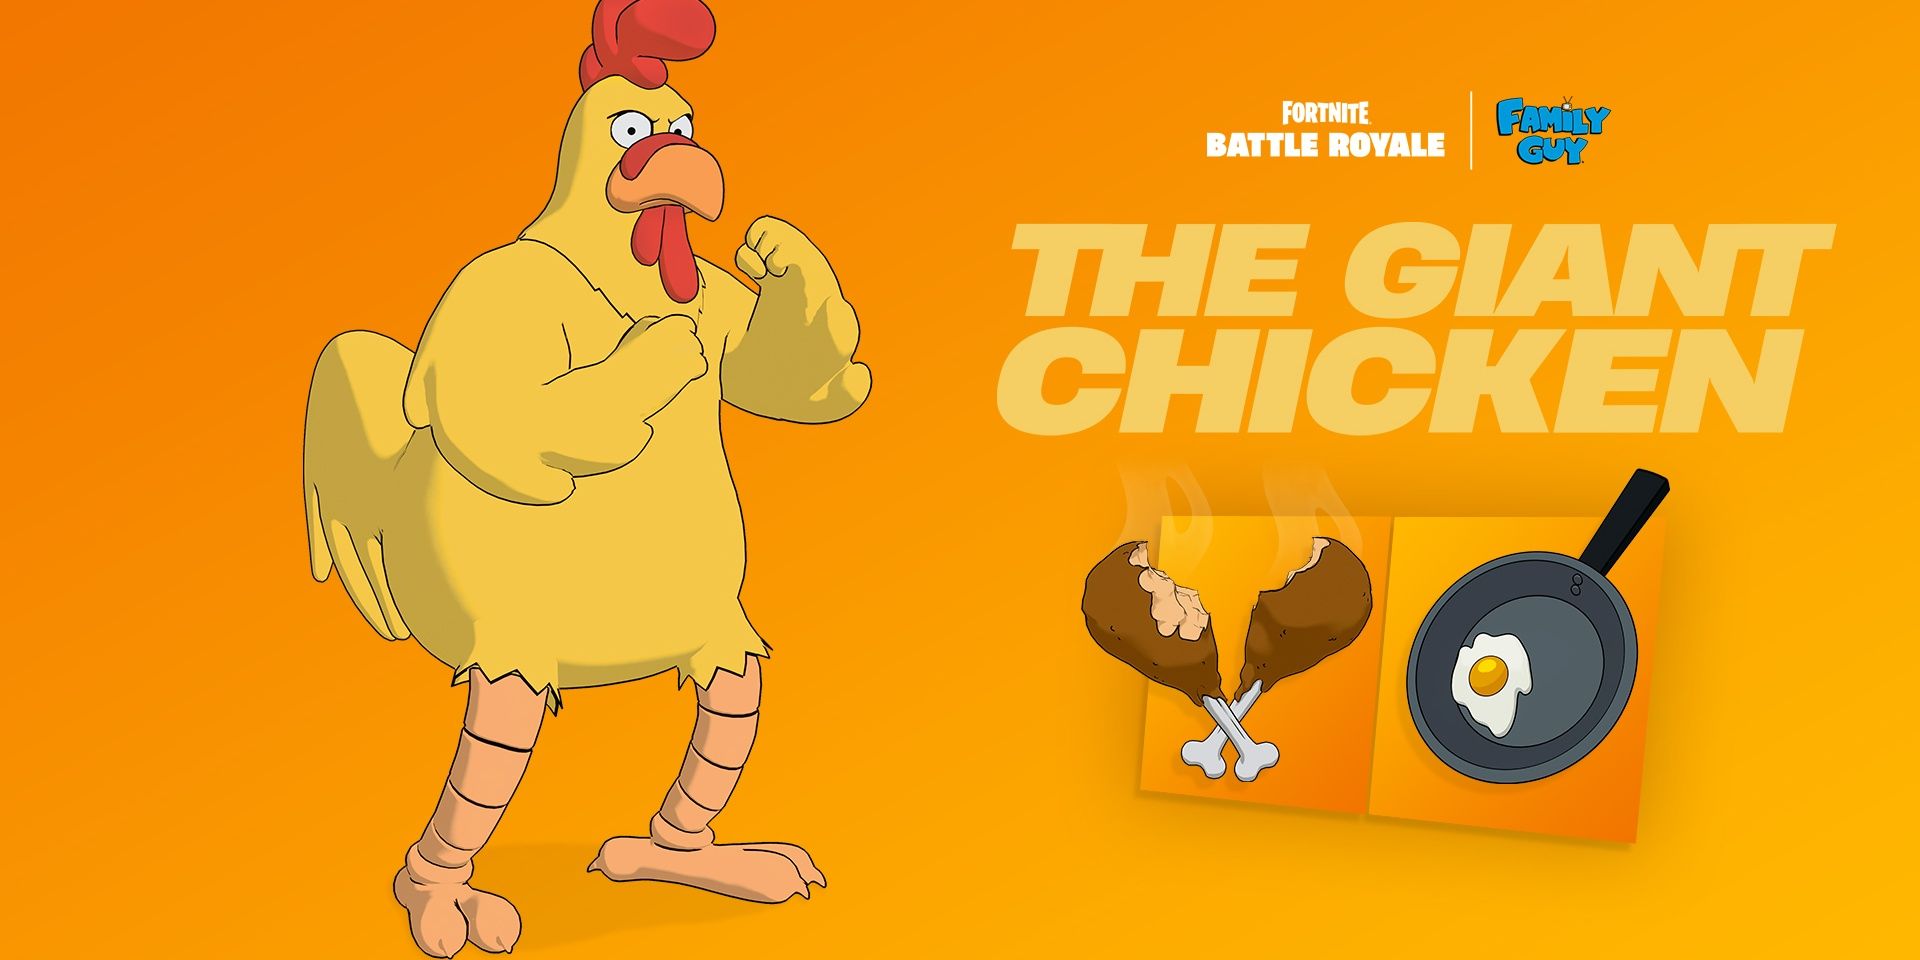 the giant chicken from family guy in fortnite